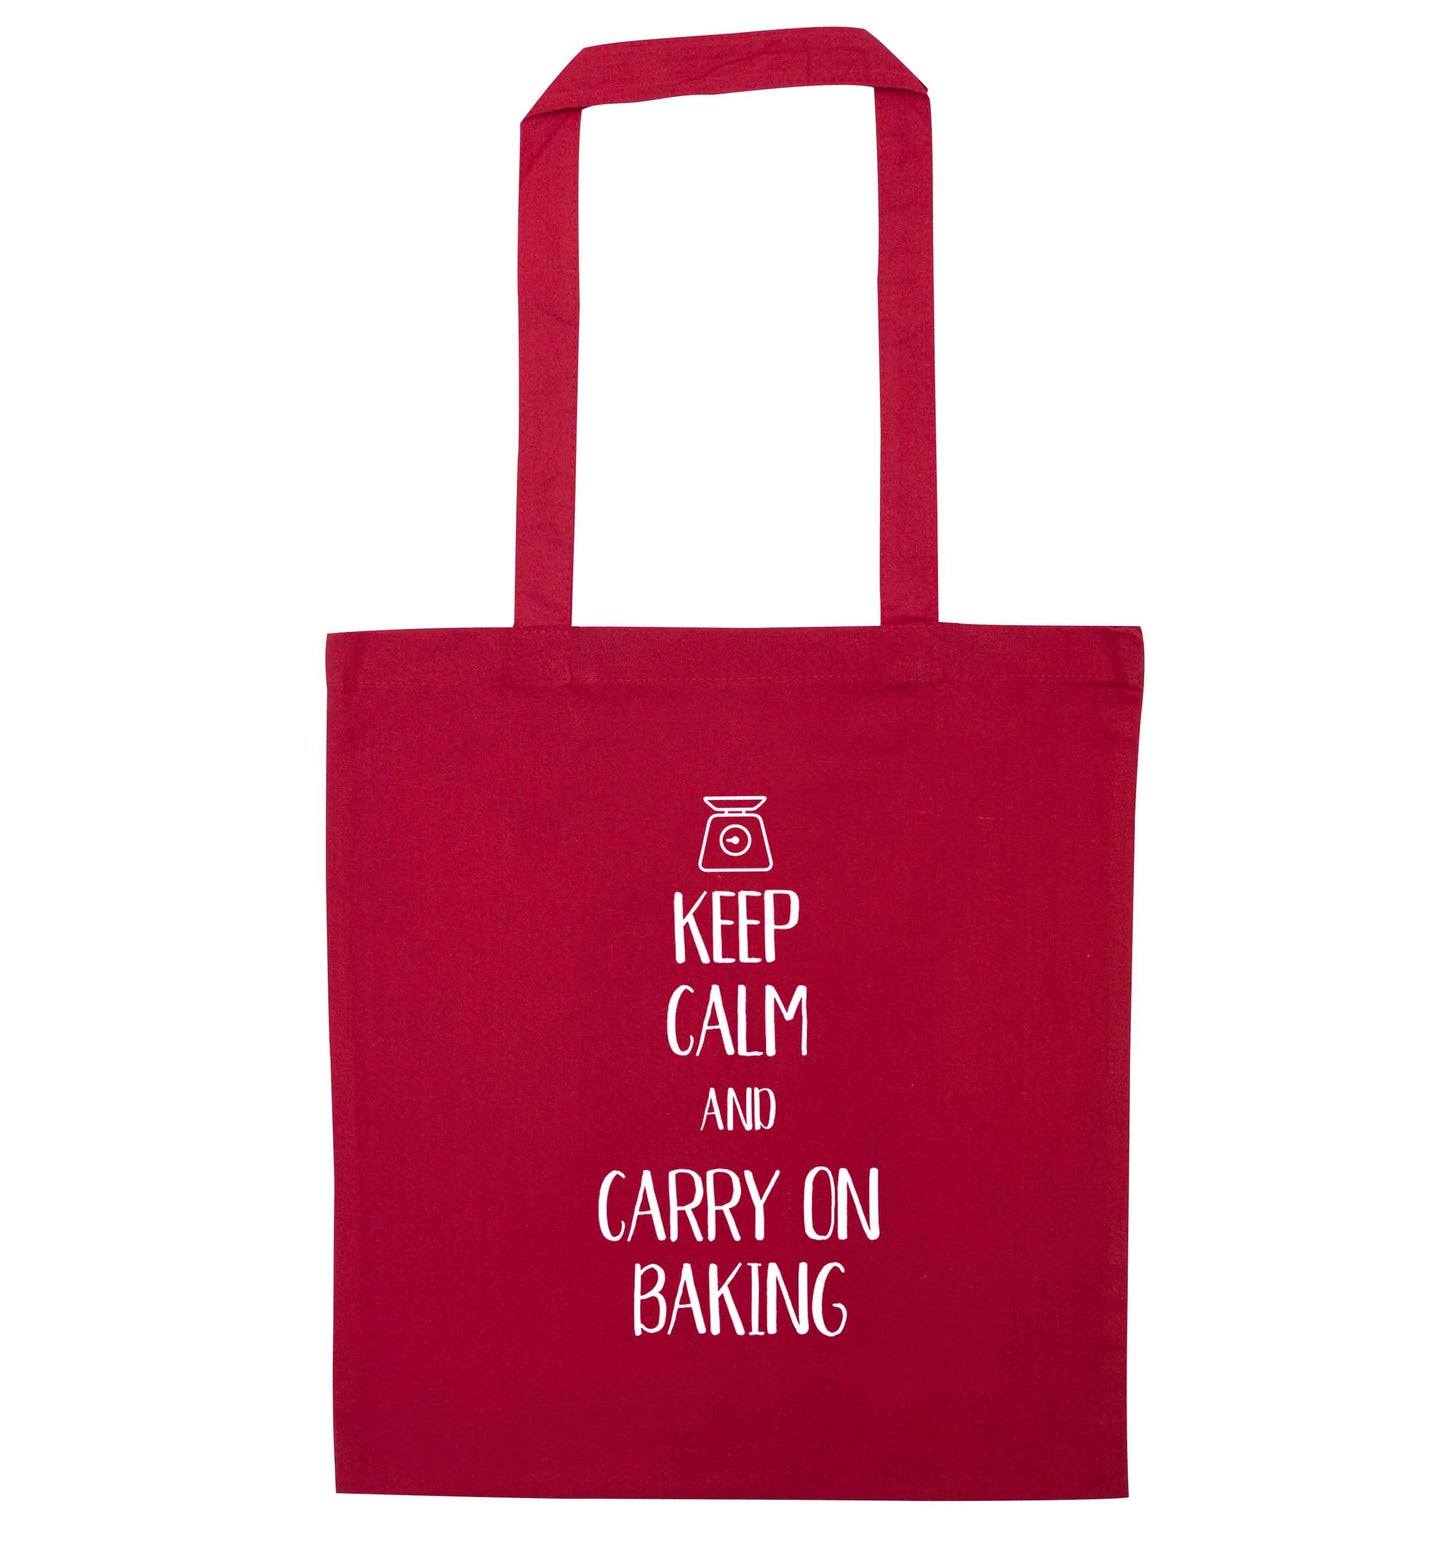 Keep calm and carry on baking red tote bag